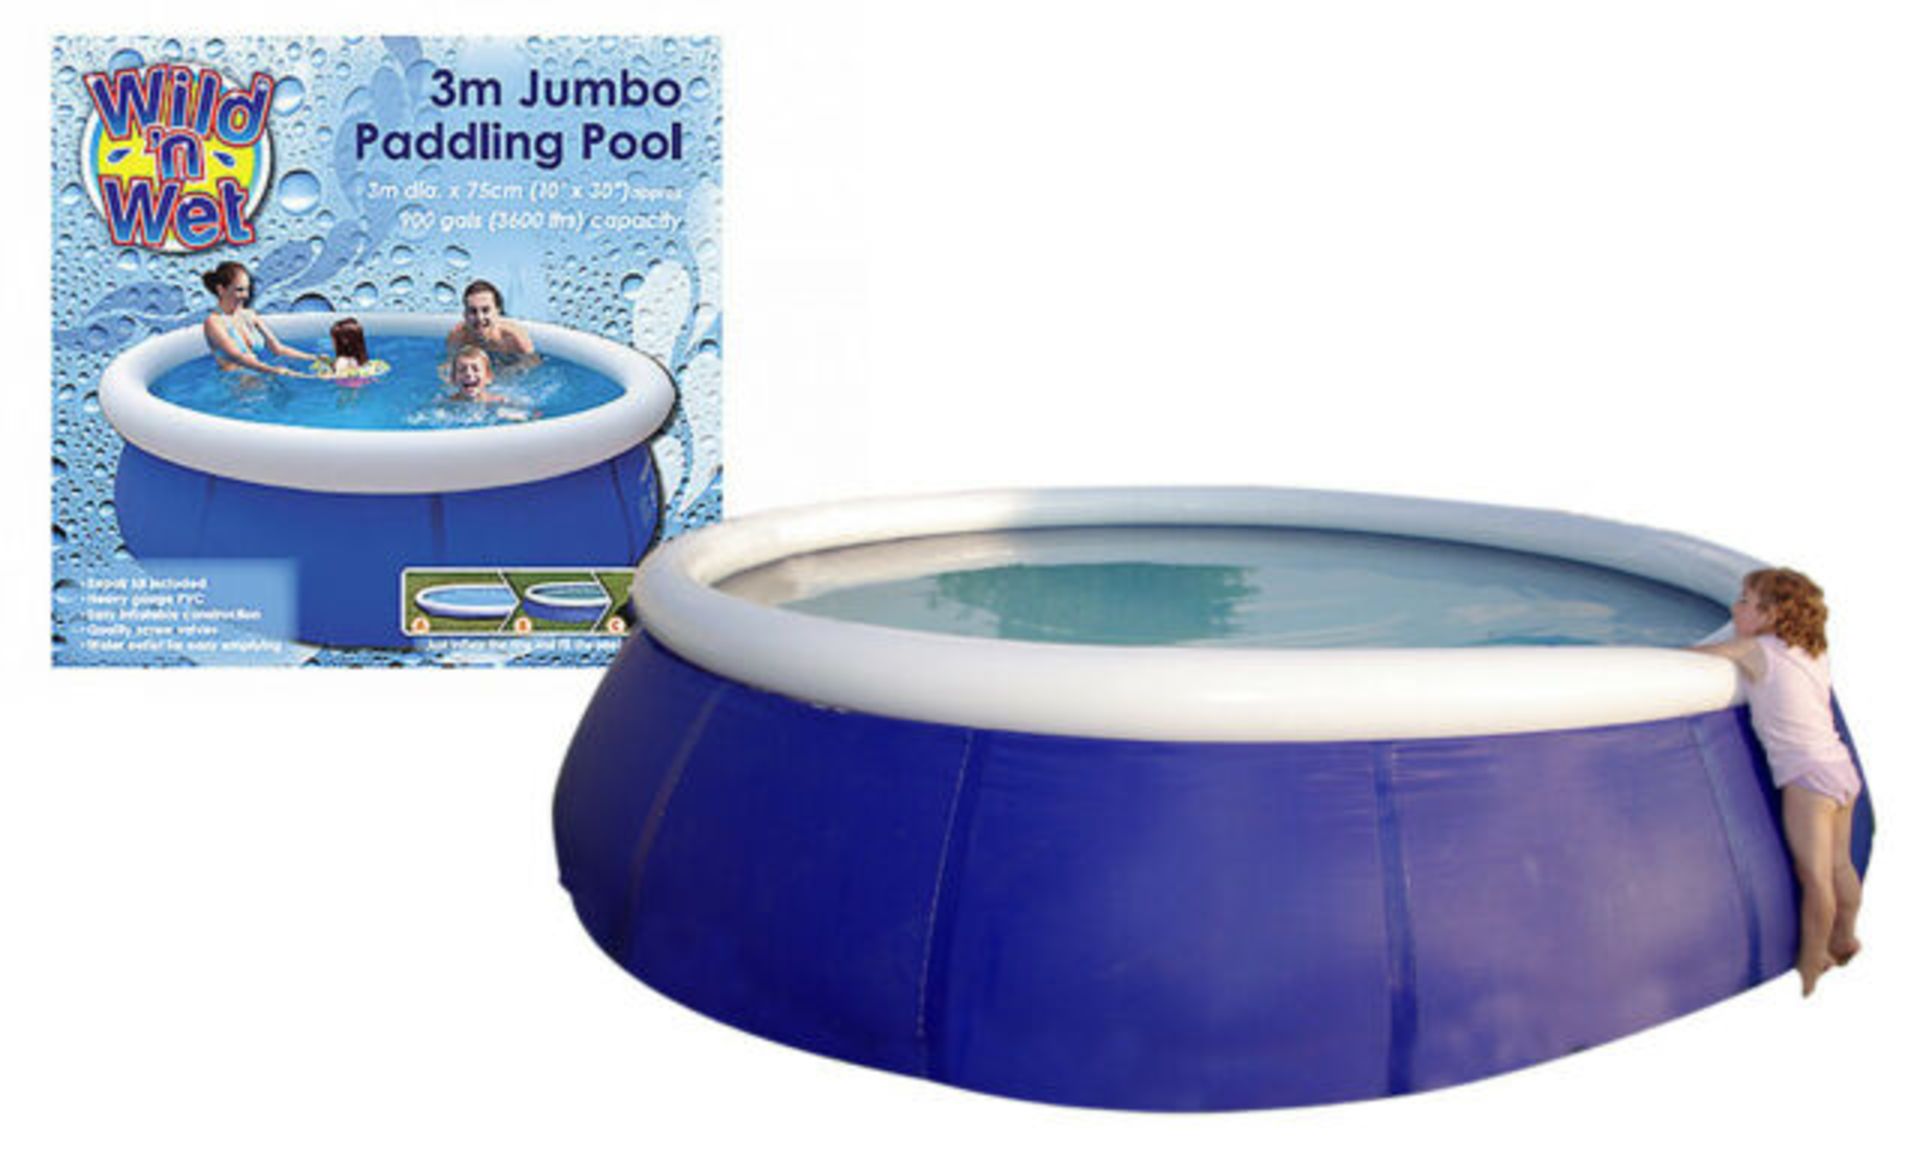 V Brand New 3m Jumbo Paddling Pool - Includes Repair Kit - Easy Inflatable Construction - Quality - Image 2 of 2